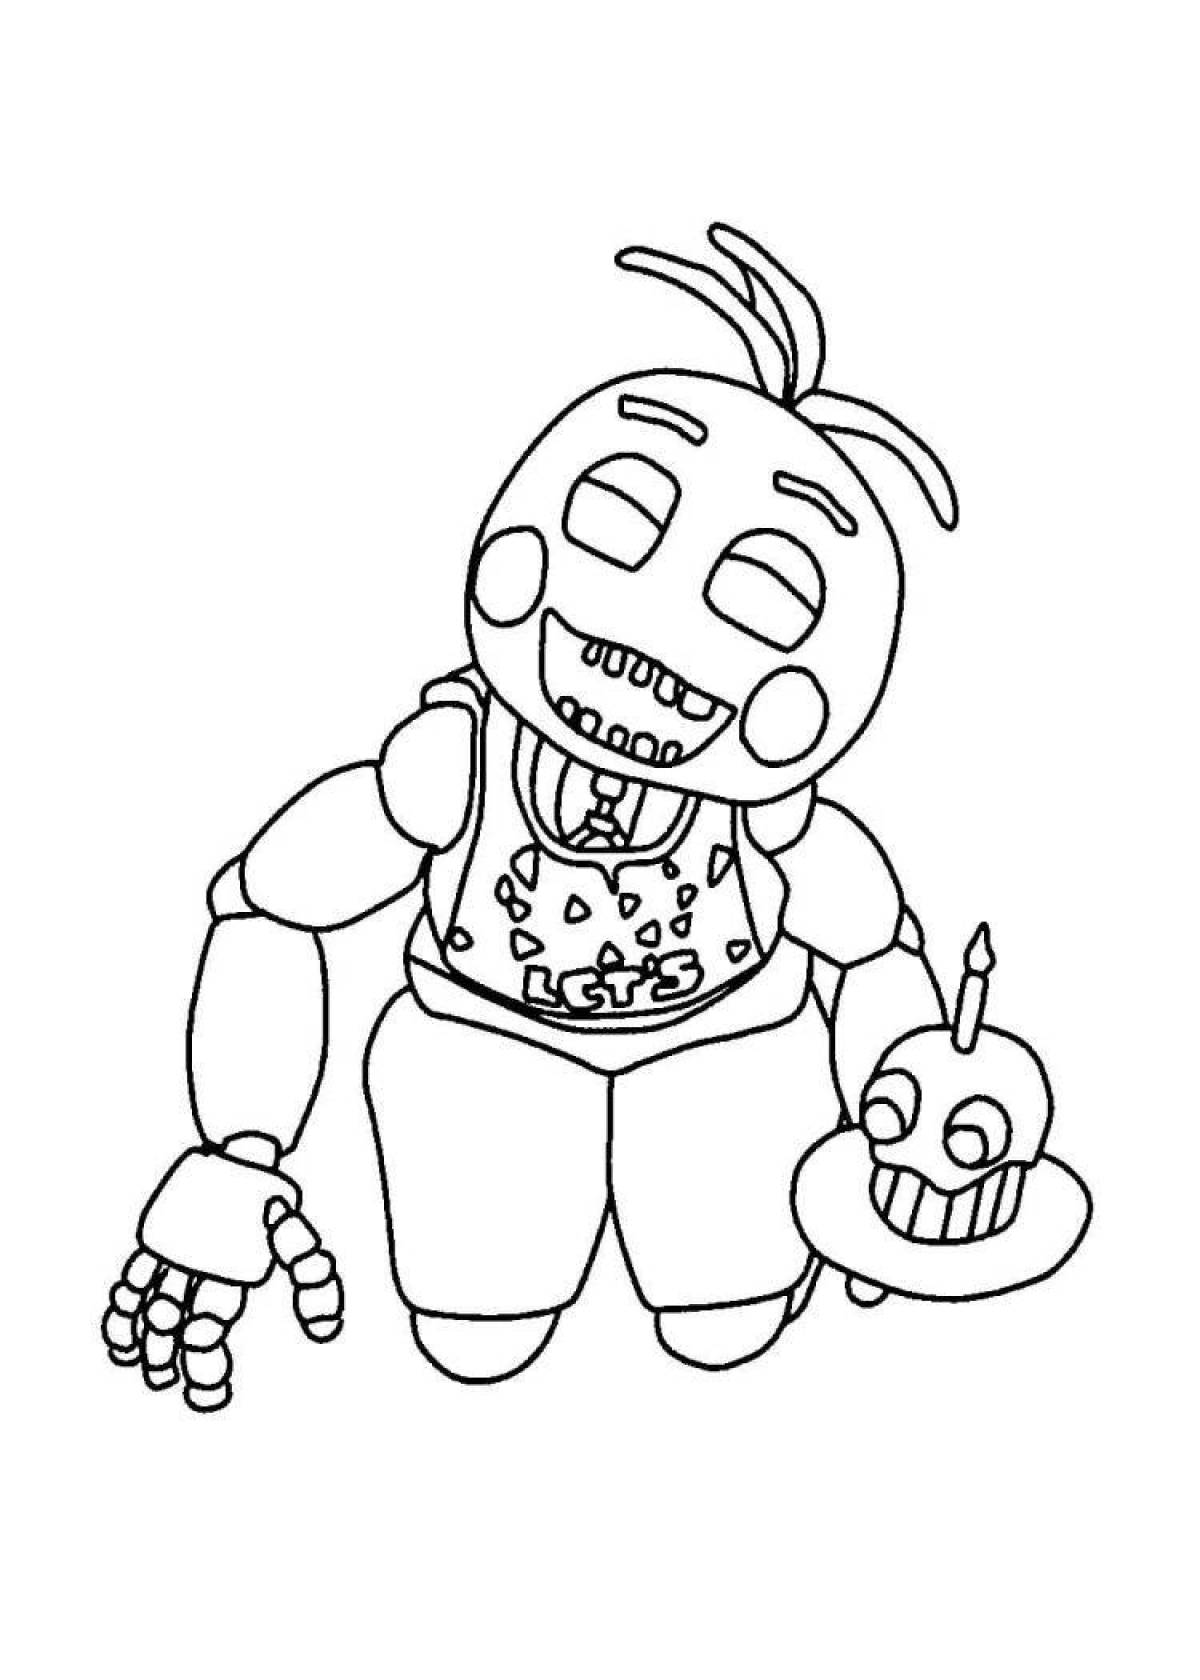 Great coloring fnaf 2 puppet